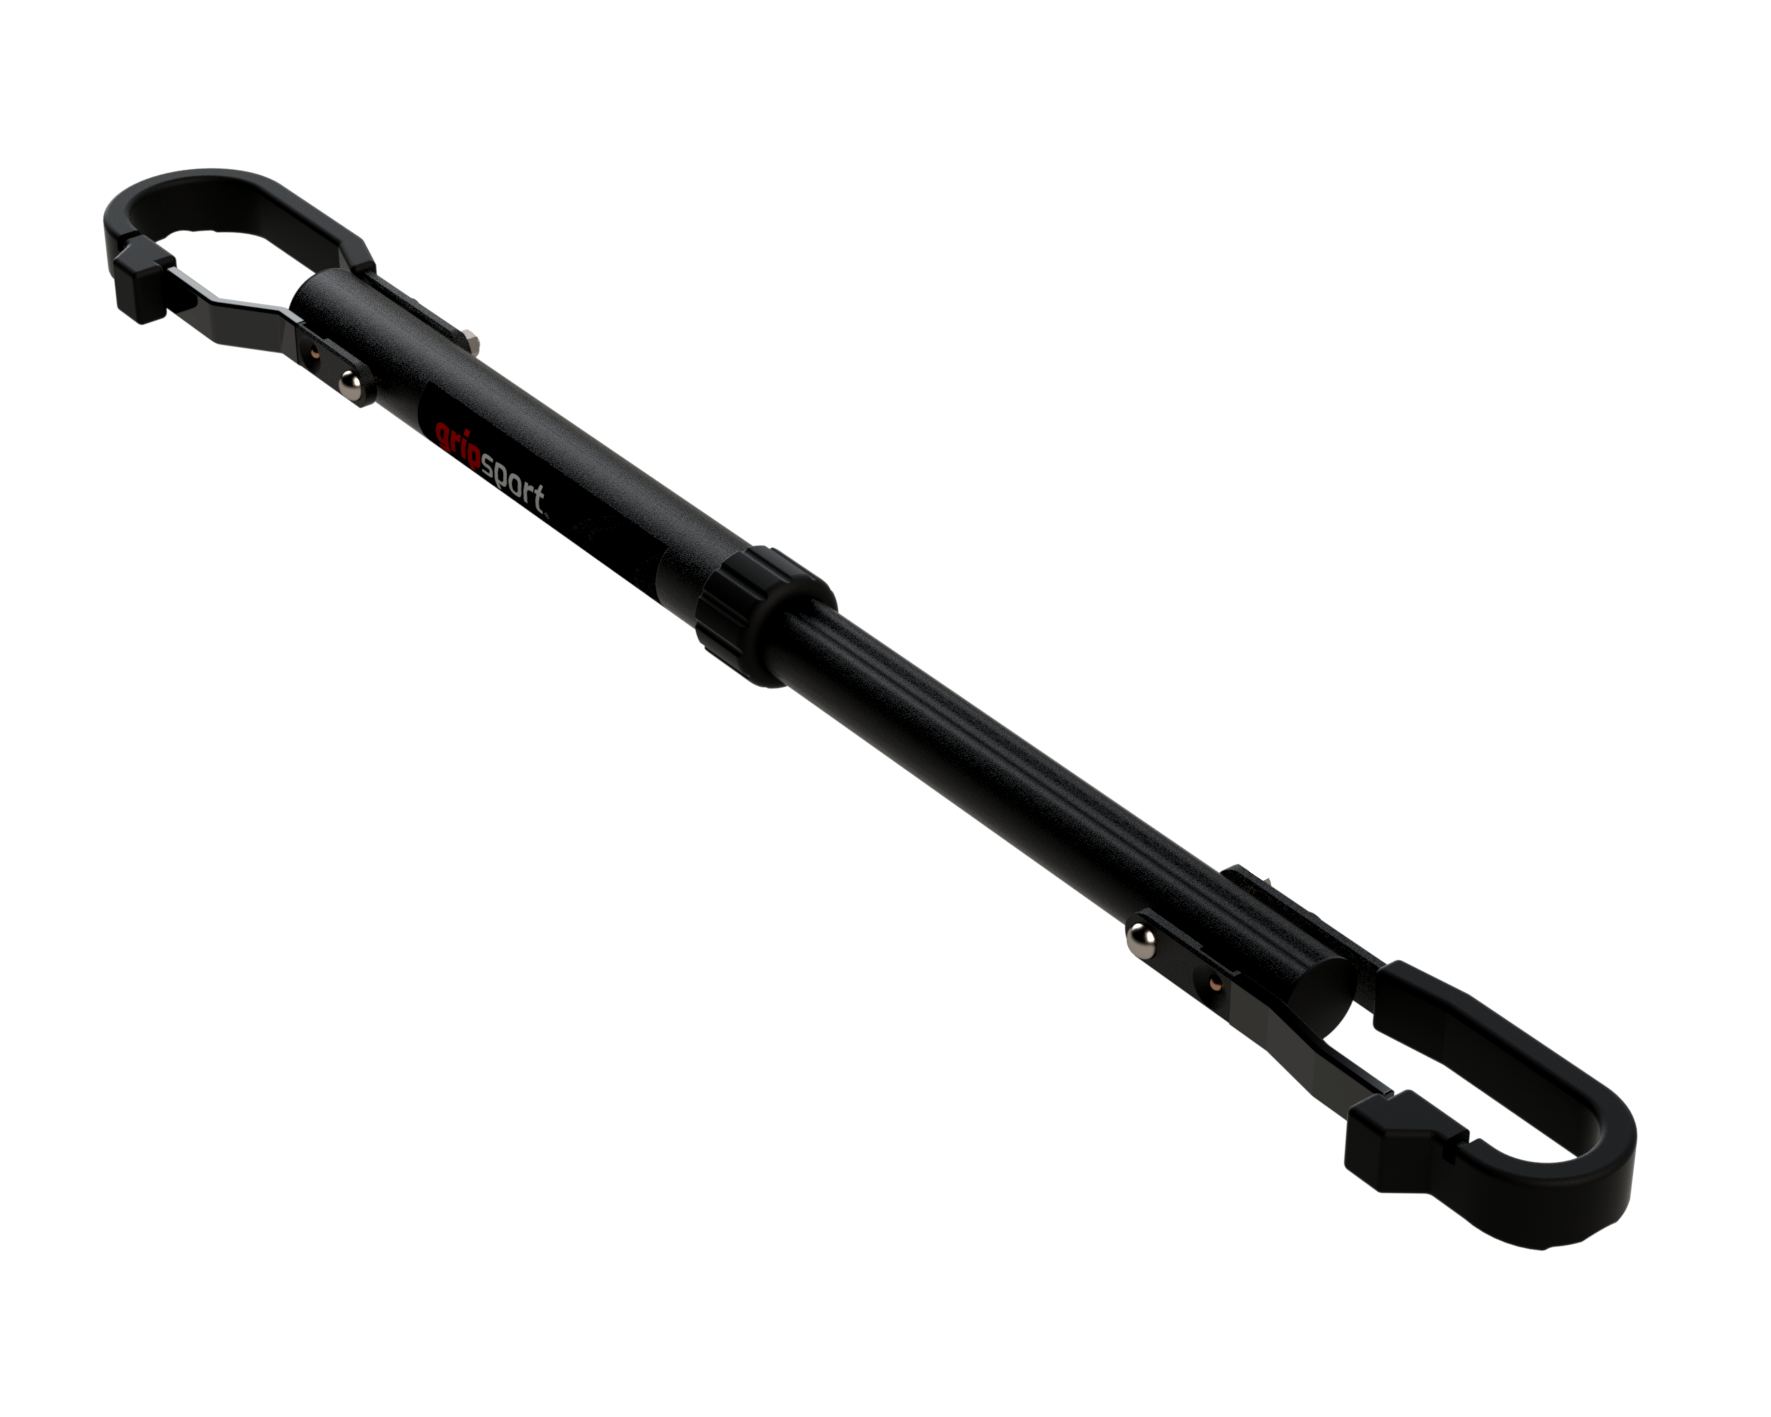 Top Tube Adapter